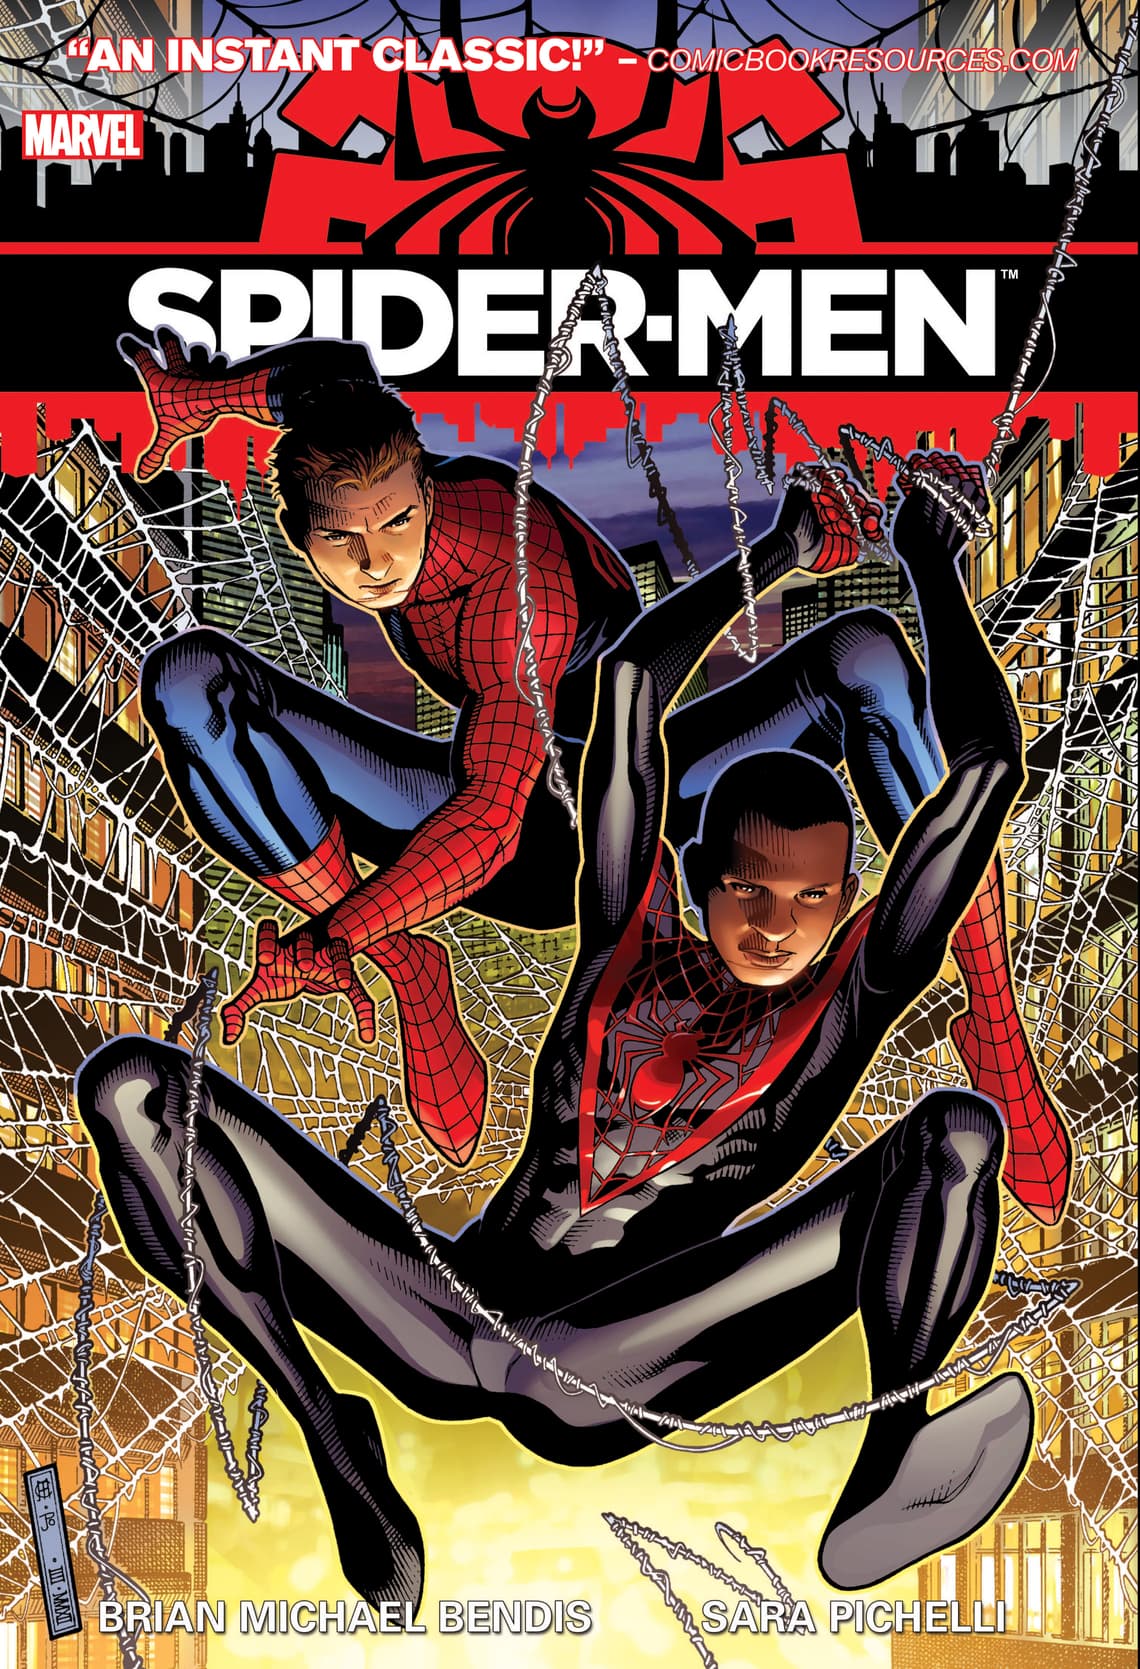 Cover to Spider-Men Vol. 1